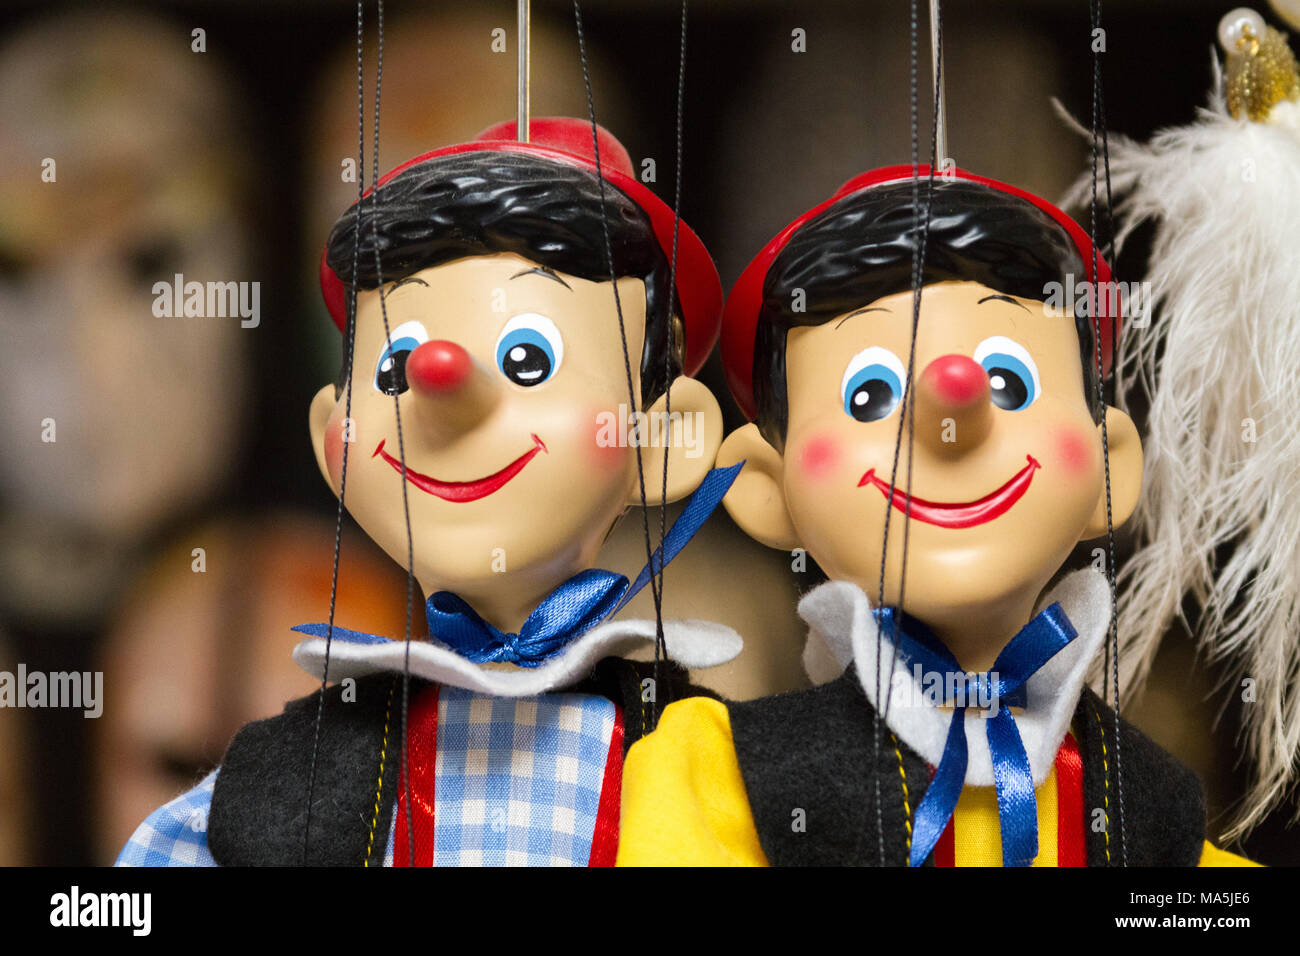 Venezia (Venice), Italy. 2 February 2018. Pinocchio puppet on strings in a store. Stock Photo